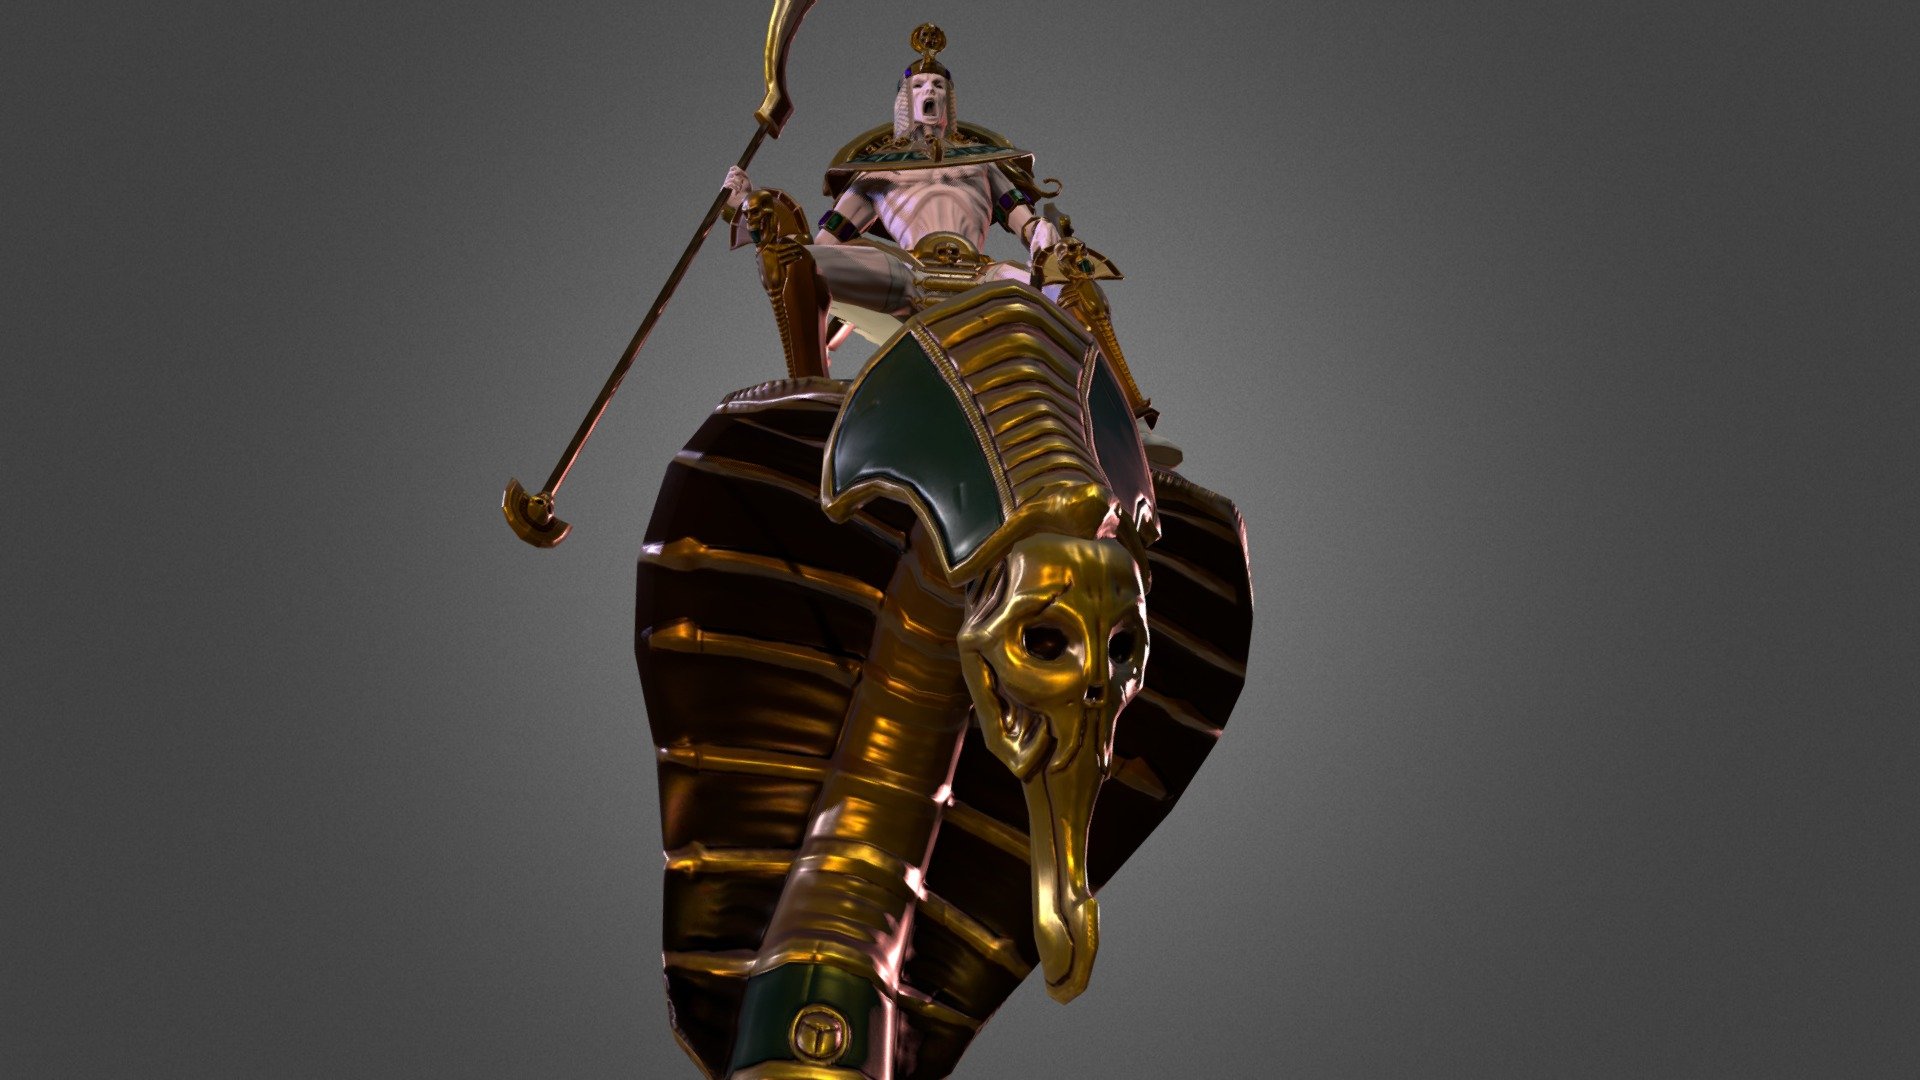 &ldquo;Necropolis Knights are powerful, elite warriors who ride atop giant snake-shaped statues given to them as a reward for their prowess and utter dedication to their sovereign lord